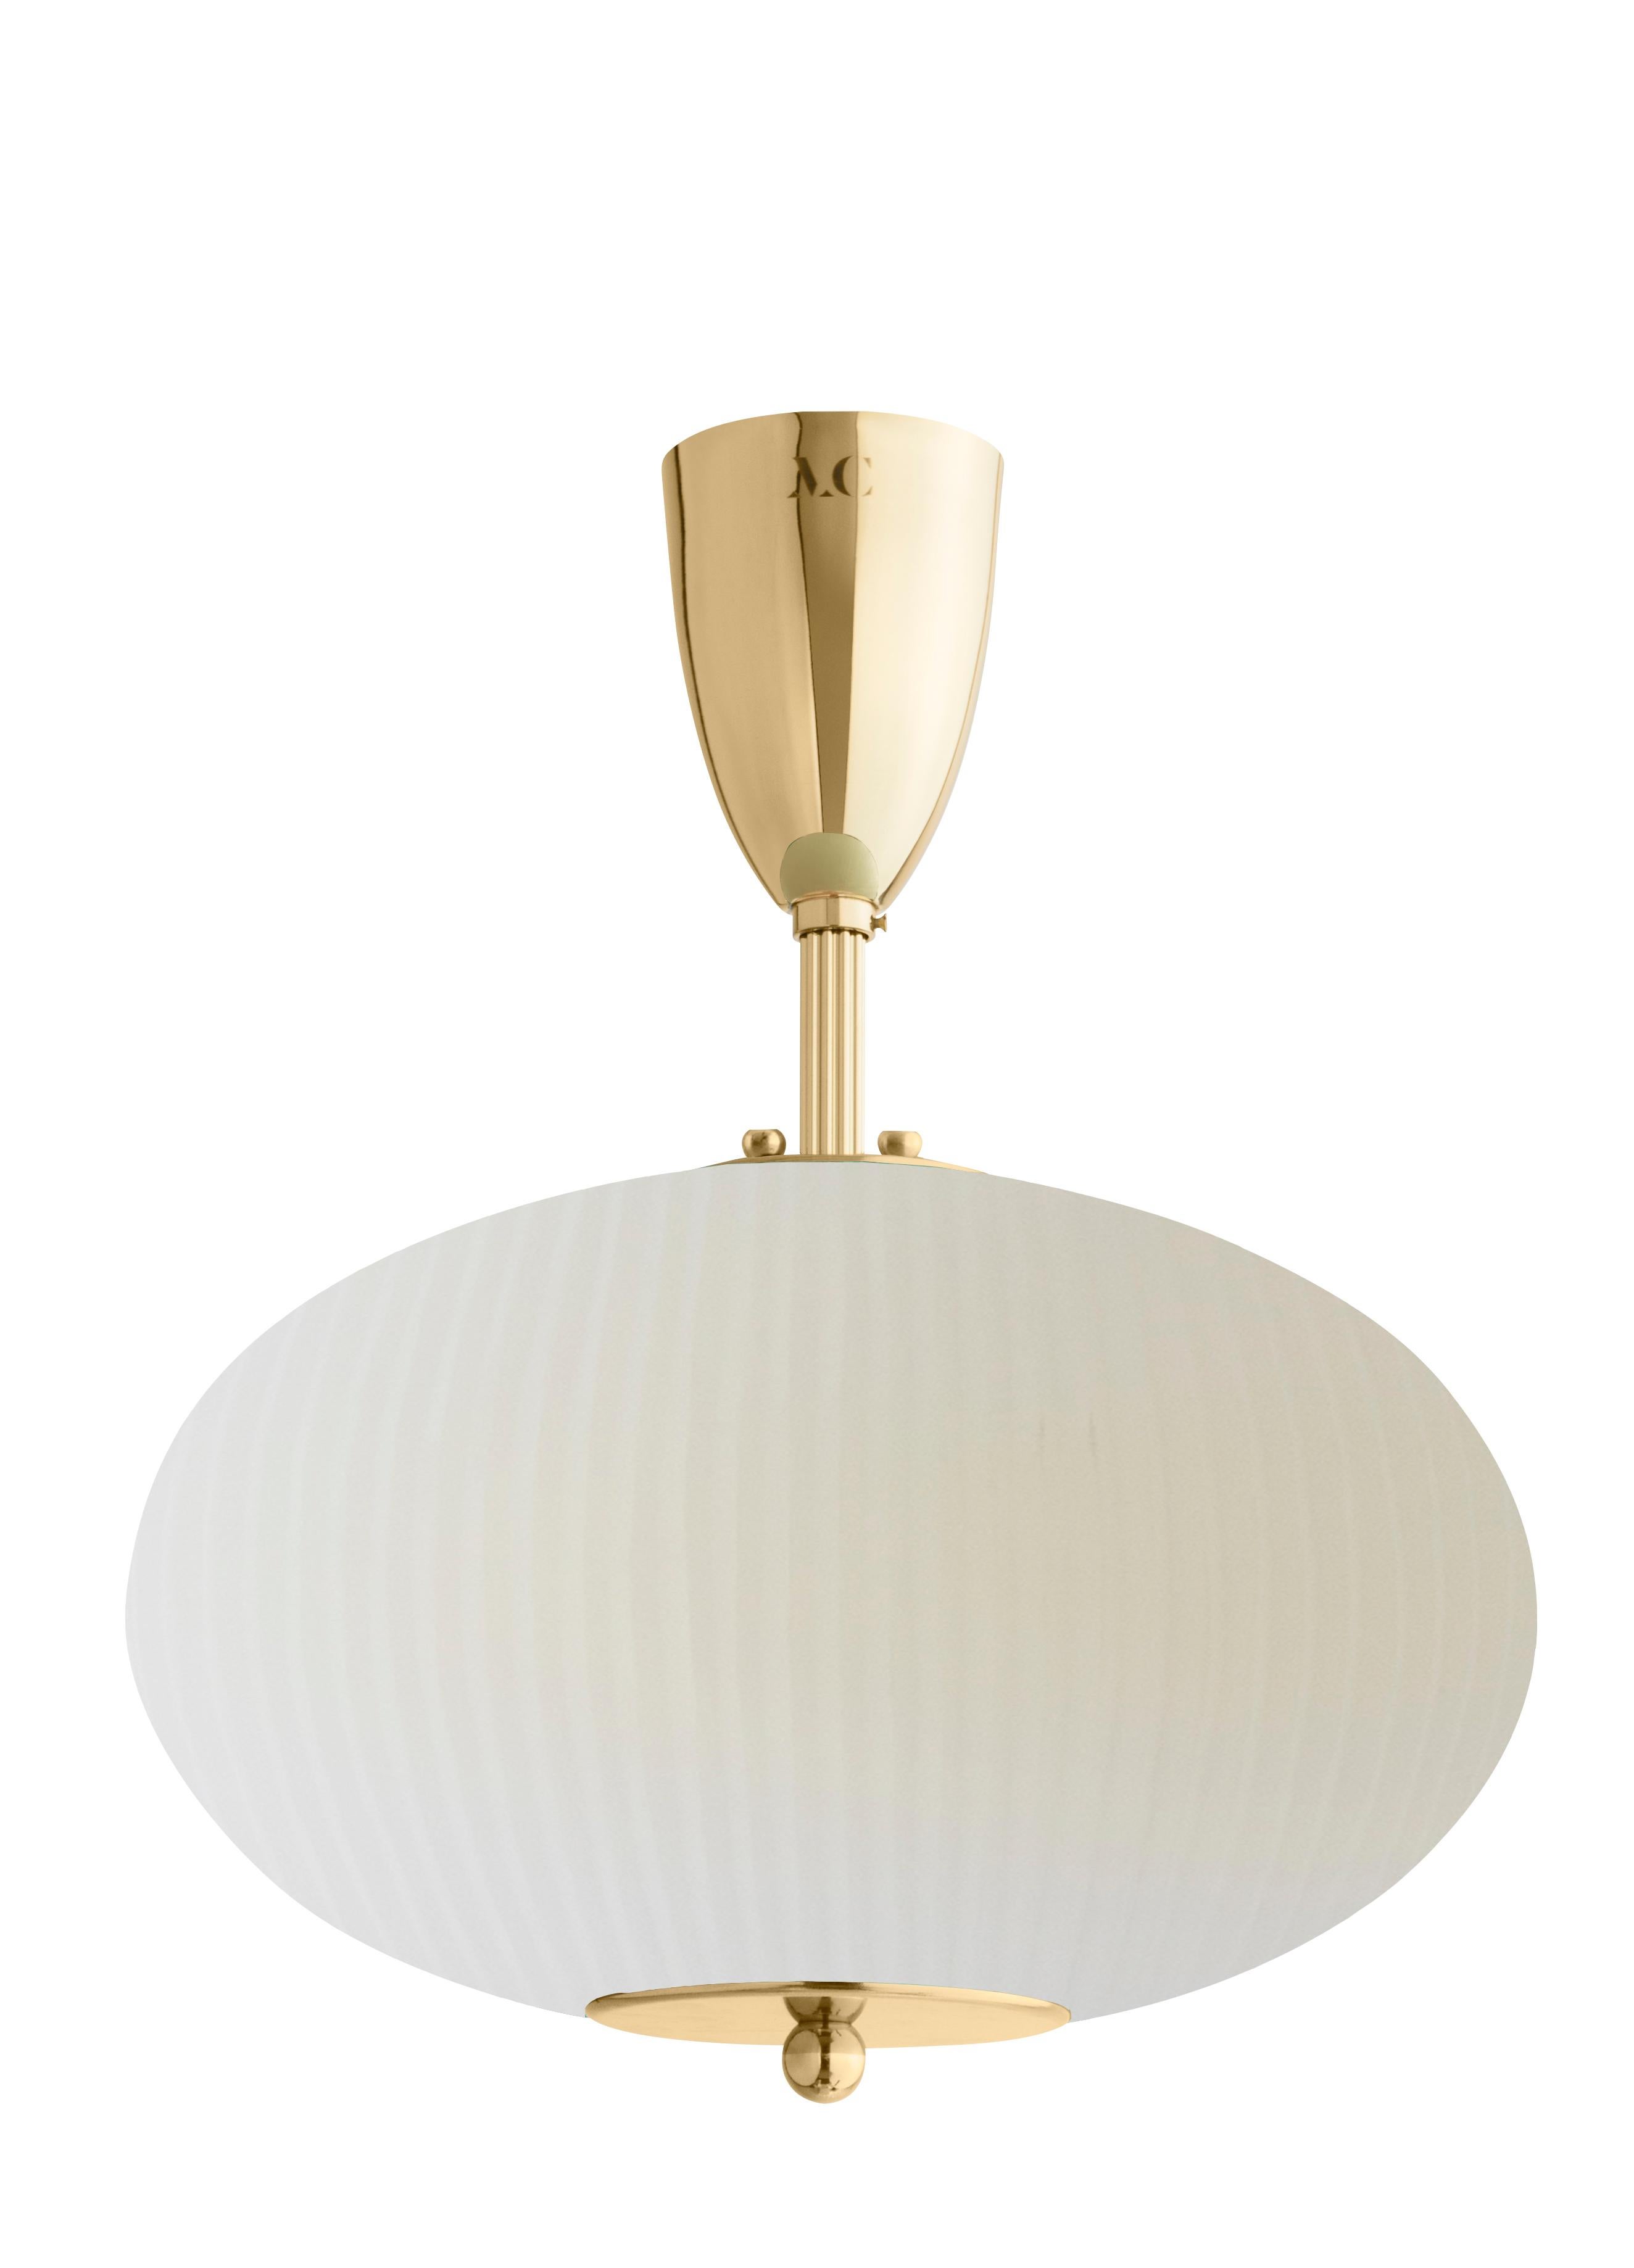 Ceiling lamp china 07 by Magic Circus Editions.
Dimensions: H 40 x W 32 x D 32 cm.
Materials: brass, mouth blown glass sculpted with a diamond saw.
Colour: ivory.

Available finishes: brass, nickel.
Available colours: enamel soft white, soft